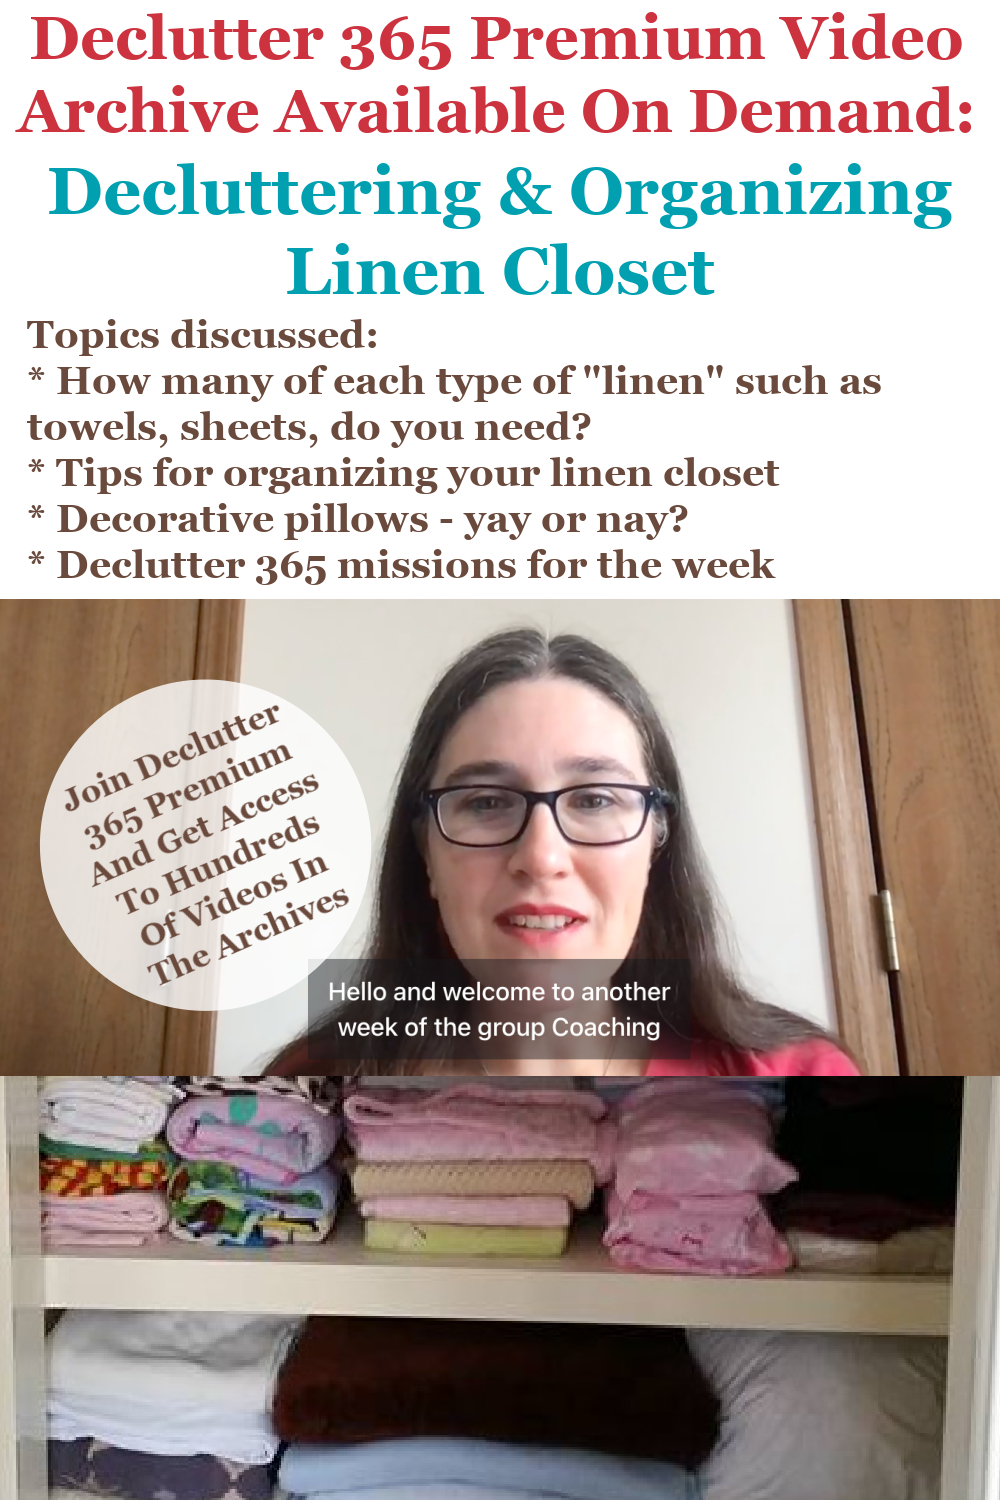 Declutter 365 Premium video archive available on demand all about decluttering and organizing your linen closet, on Home Storage Solutions 101